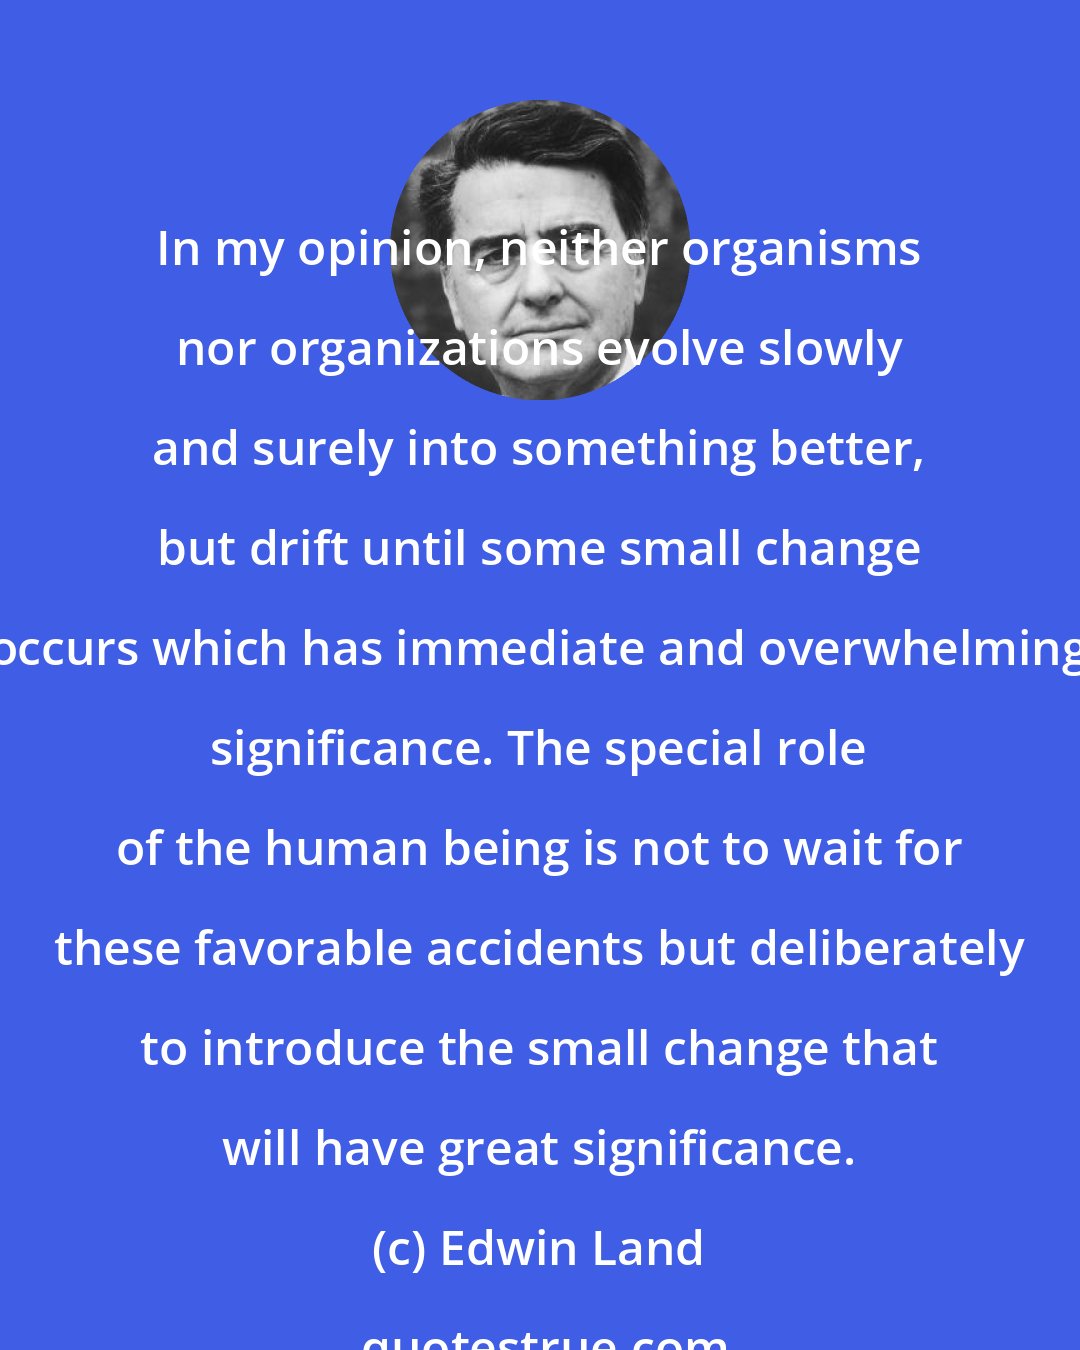 Edwin Land: In my opinion, neither organisms nor organizations evolve slowly and surely into something better, but drift until some small change occurs which has immediate and overwhelming significance. The special role of the human being is not to wait for these favorable accidents but deliberately to introduce the small change that will have great significance.